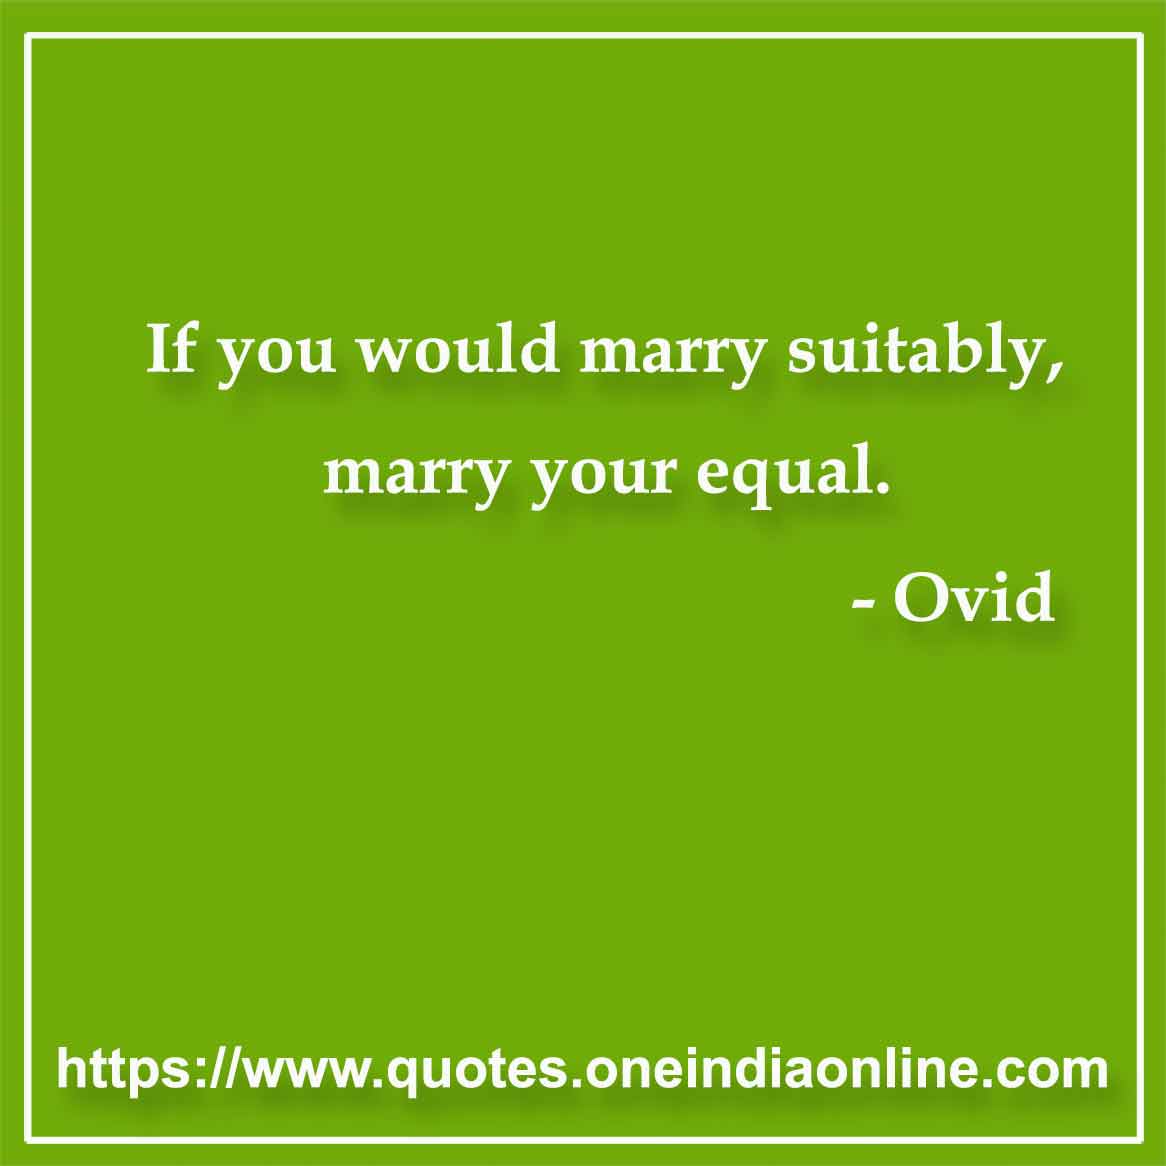 If you would marry suitably, marry your equal.

- Marriage Quotes by Ovid